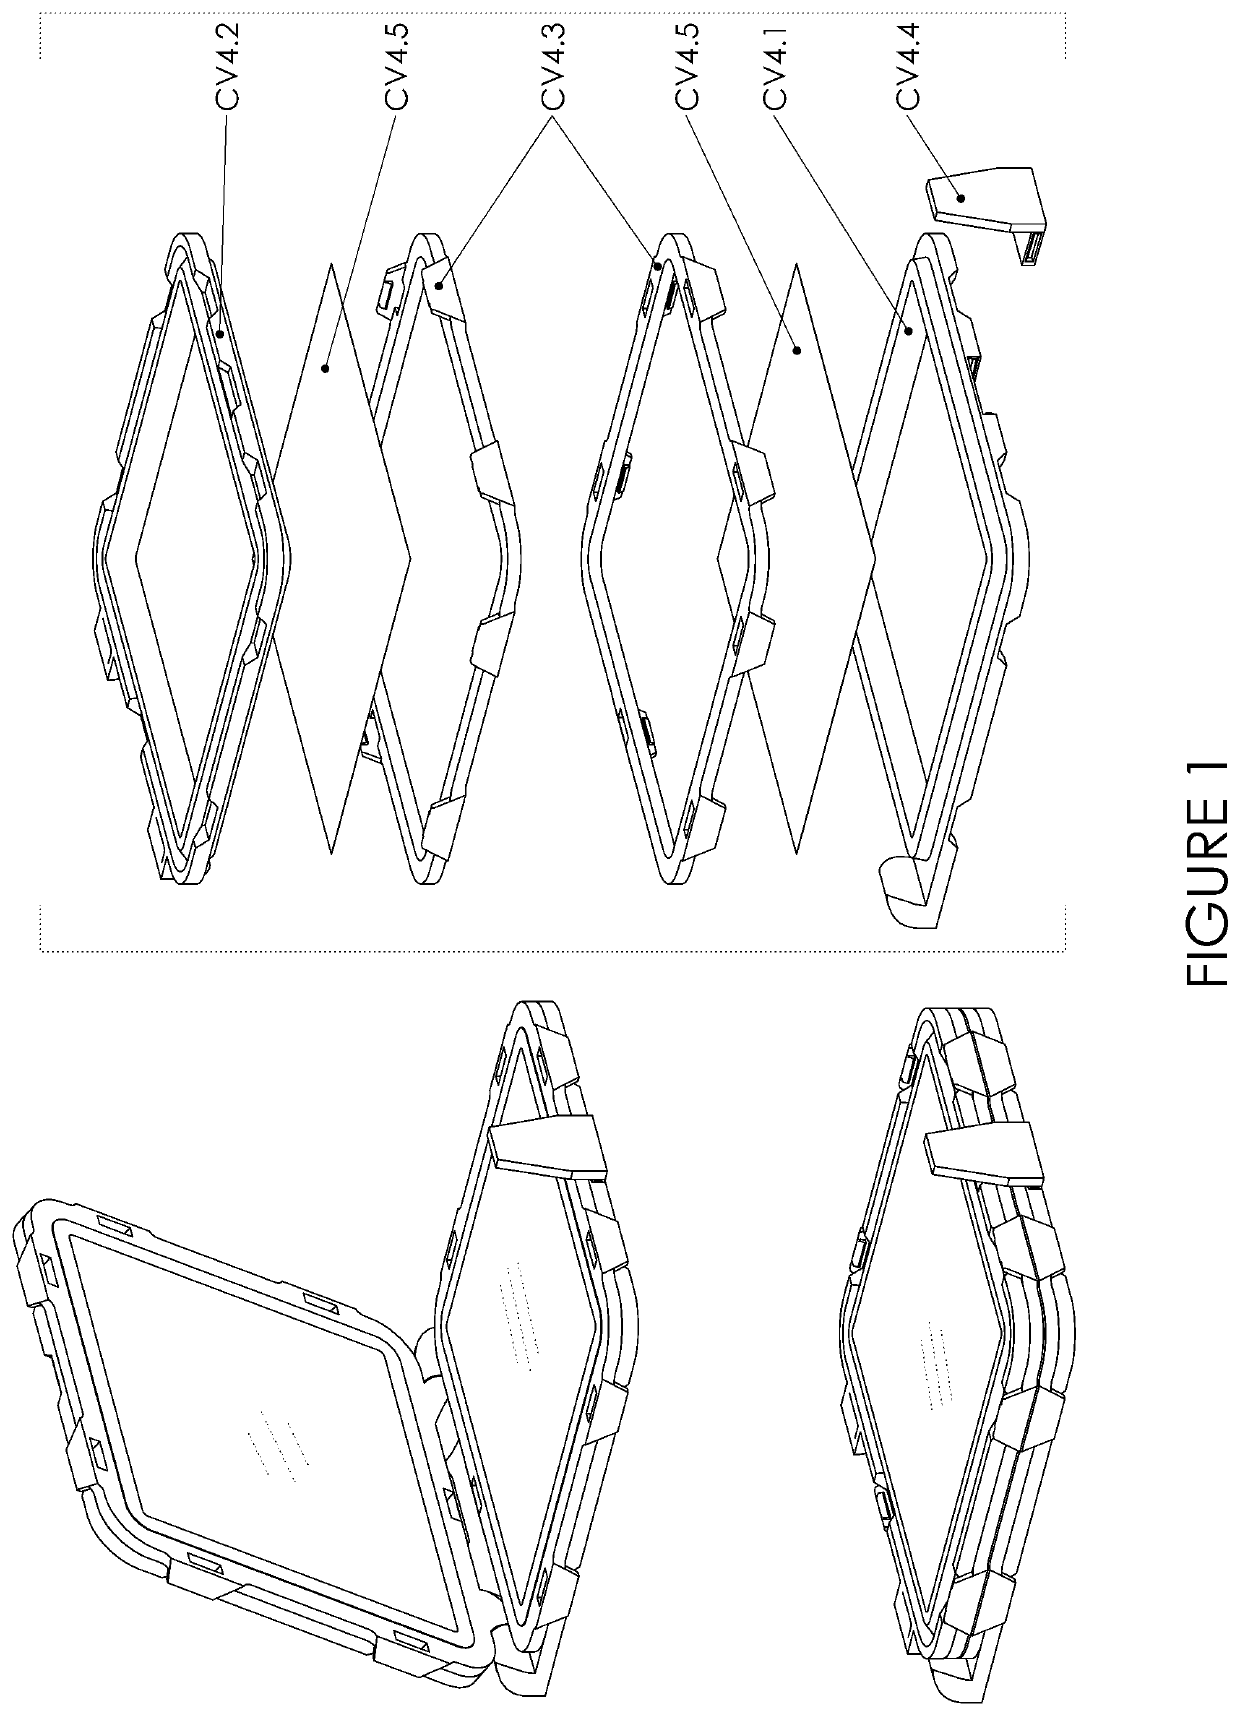 Reusable specimen imaging device holder system with replaceable membranes